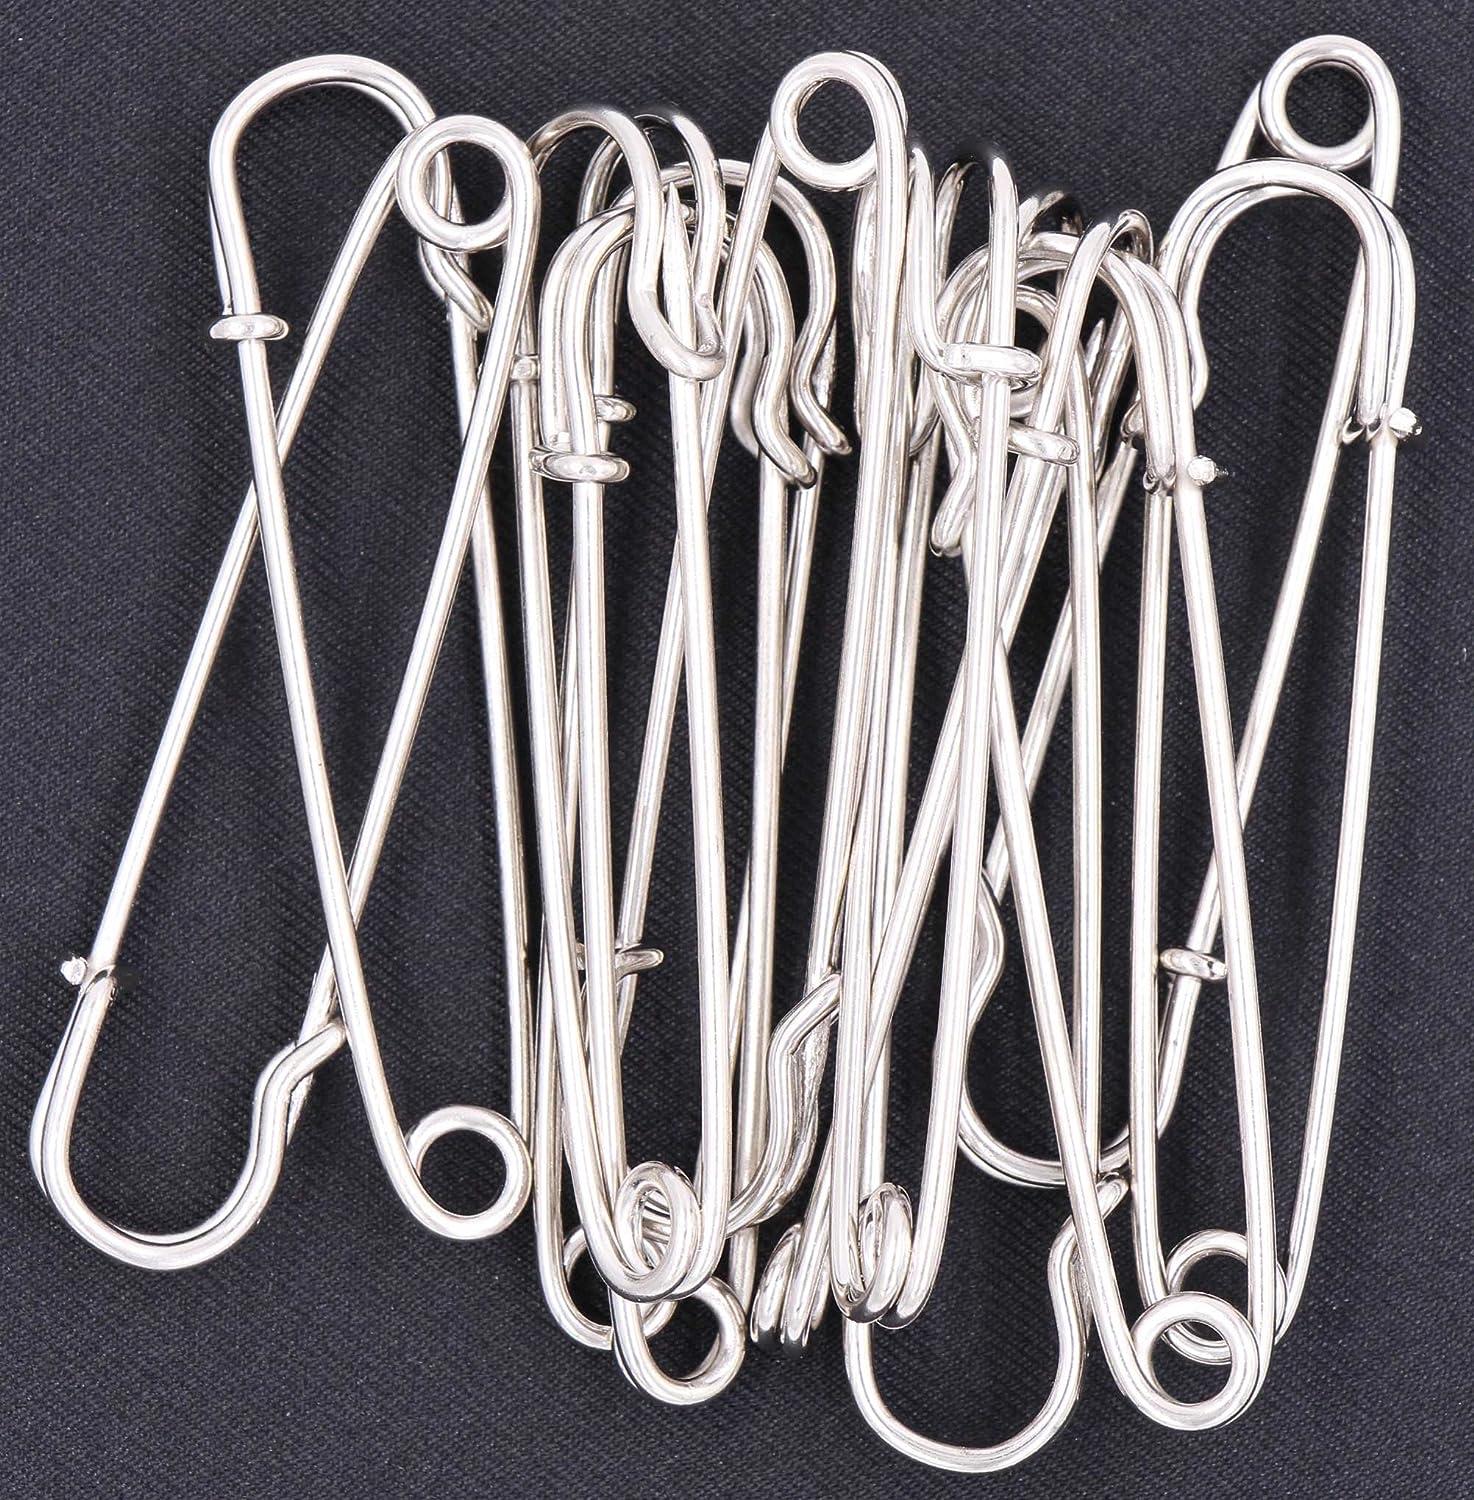 5 Inch Large Safety Pins For Clothes Big Safety Pins Heavy Giant Safety Pin  New